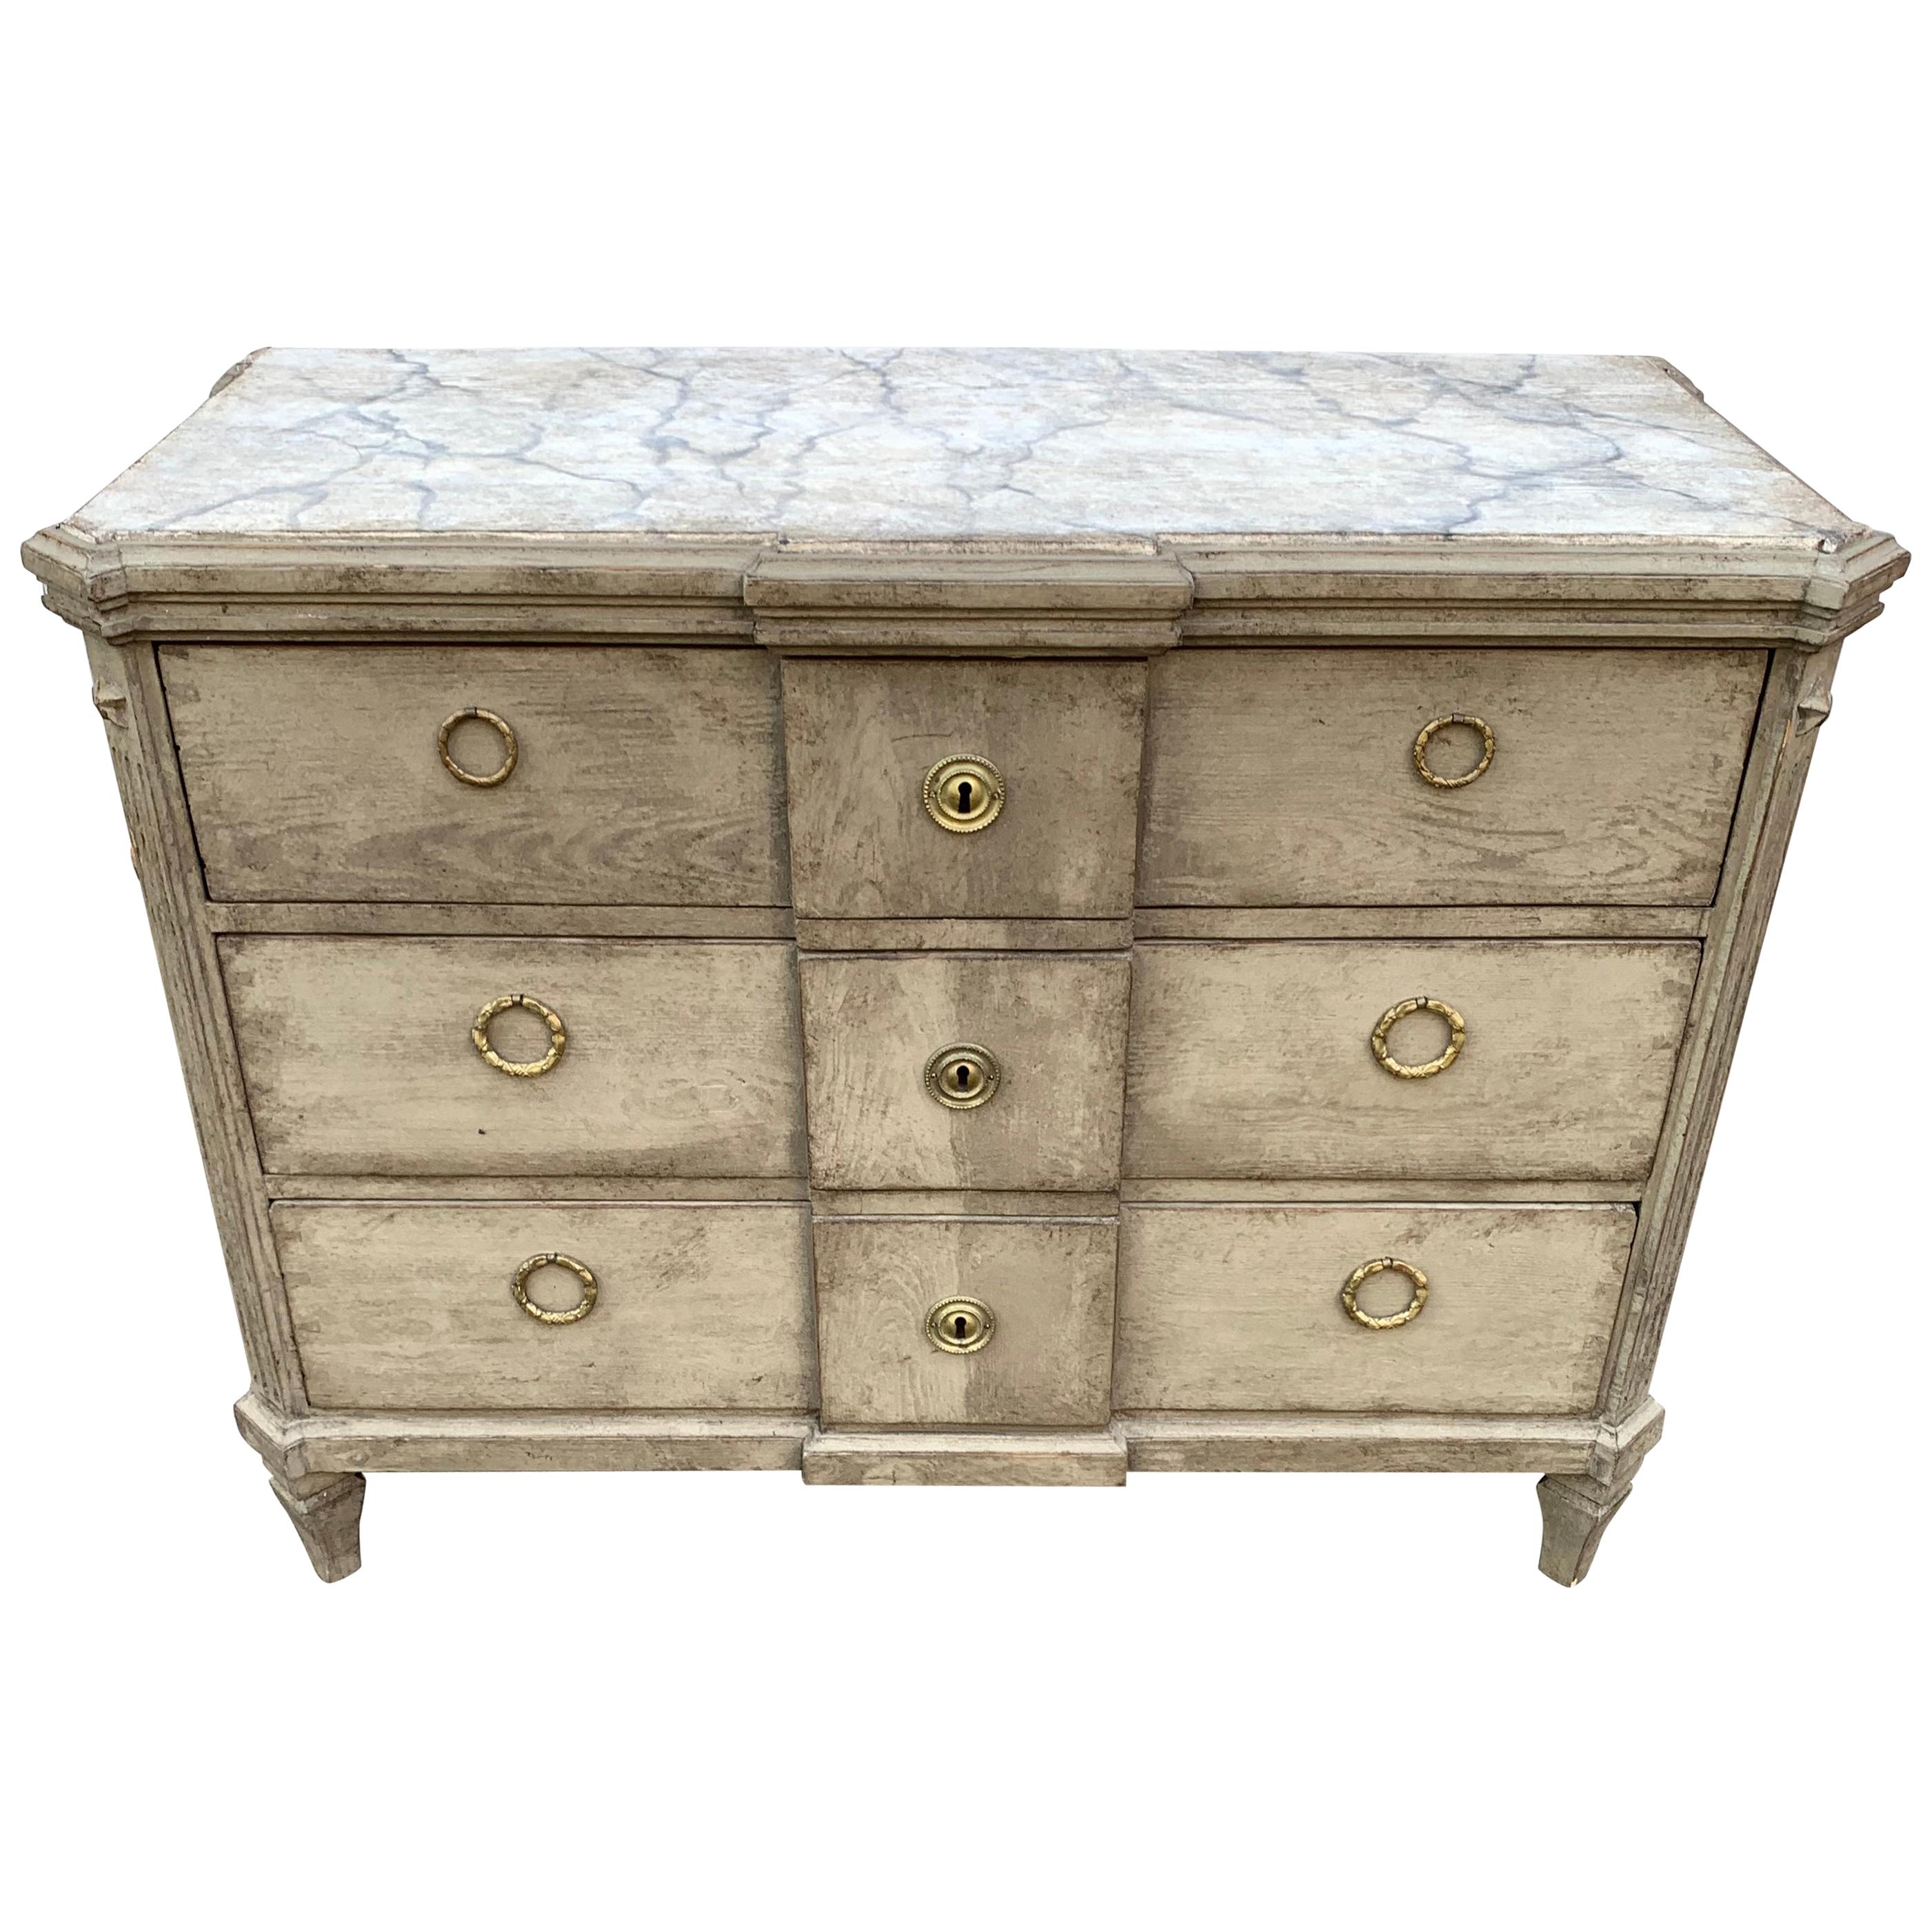 Swedish 19th century faux marble-top Gustavian style chest of drawers with brass hardware.

EUR 175 delivery to most areas of London UK, The Netherlands, Belgium, Denmark, Sweden and Northern Germany.